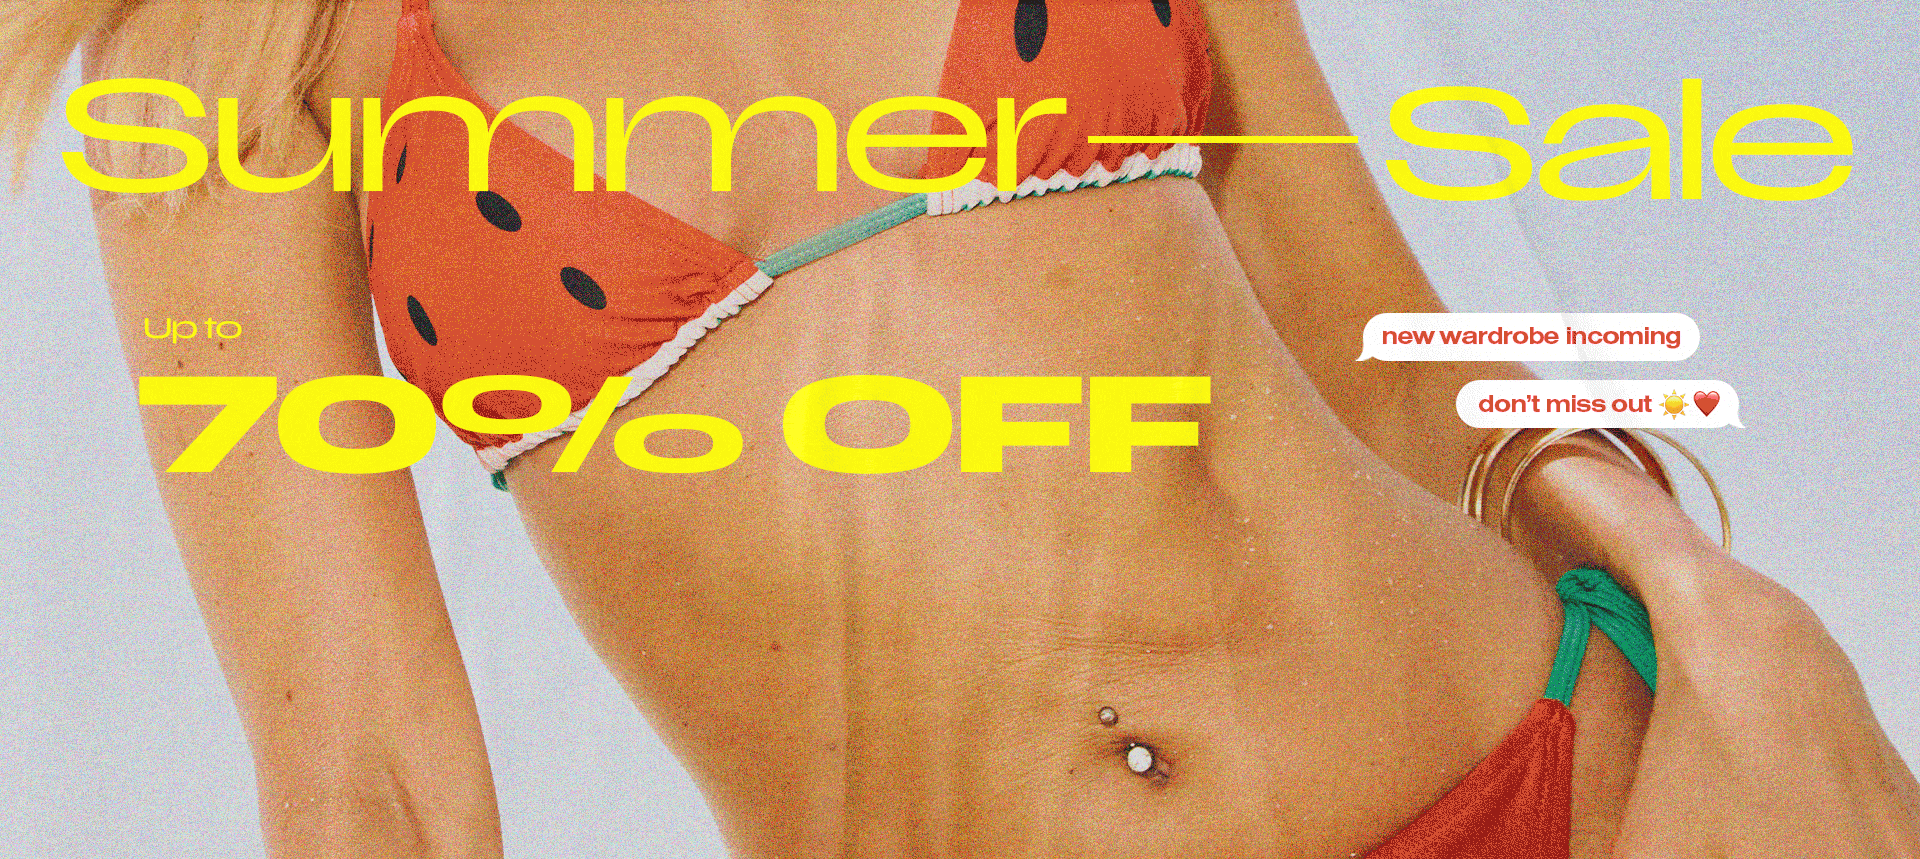 THE BIG SUMMER CLEARANCE UP TO 70% OFF ALMOST EVERYTHING!*